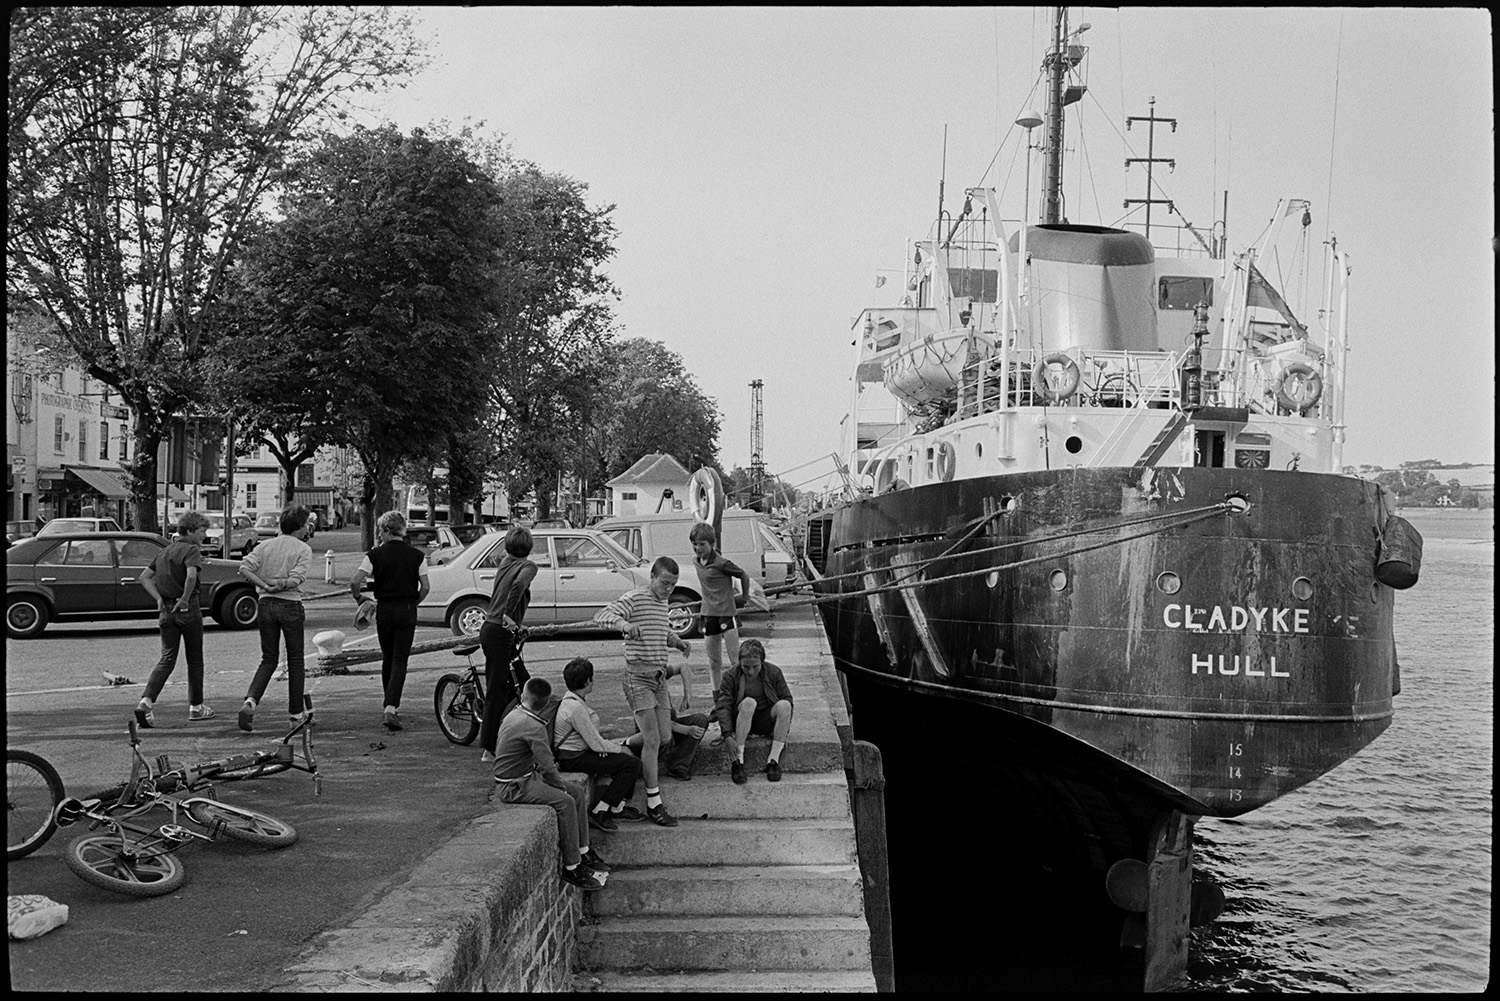 Ship at quayside, children with bicycles. 
[Children playing by steps leading down from Bideford Quay to the River Torridge. The ship, Cladyke, is moored beside the quay. Parked cars and children's bicycles can be seen on the quay.]